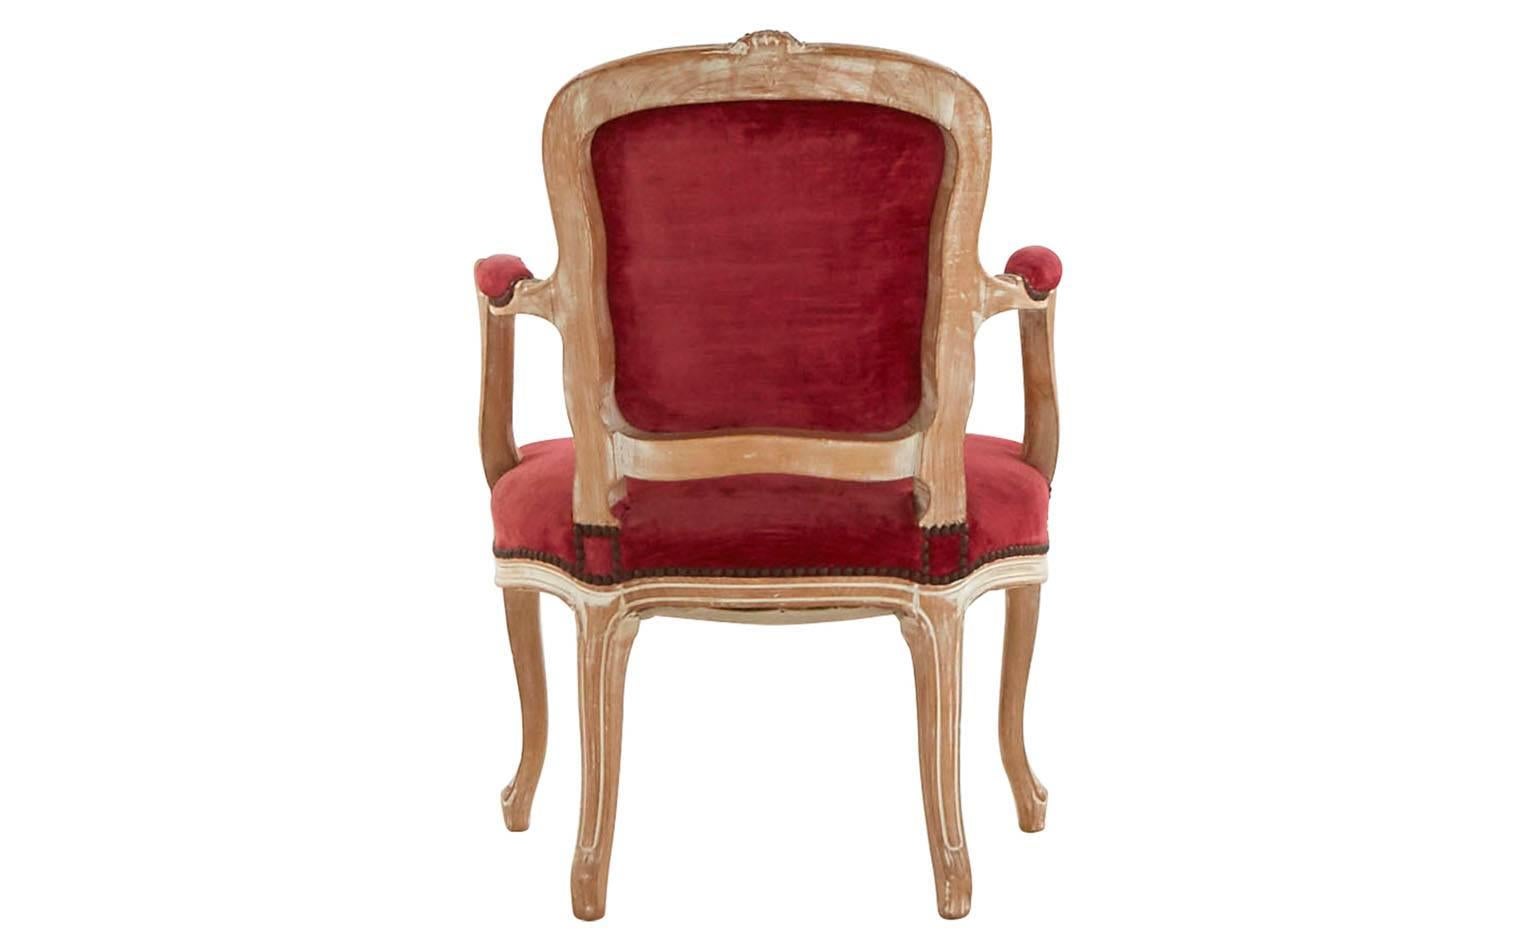 Louis XV style.
Original raspberry velvet upholstery.
Hand-painted ivory wood frame
20th century.
France.
Set of two available (priced individually).

Dimensions:
Overall: 22.5" W x 20" D x 33.5" H. 
Seat height: